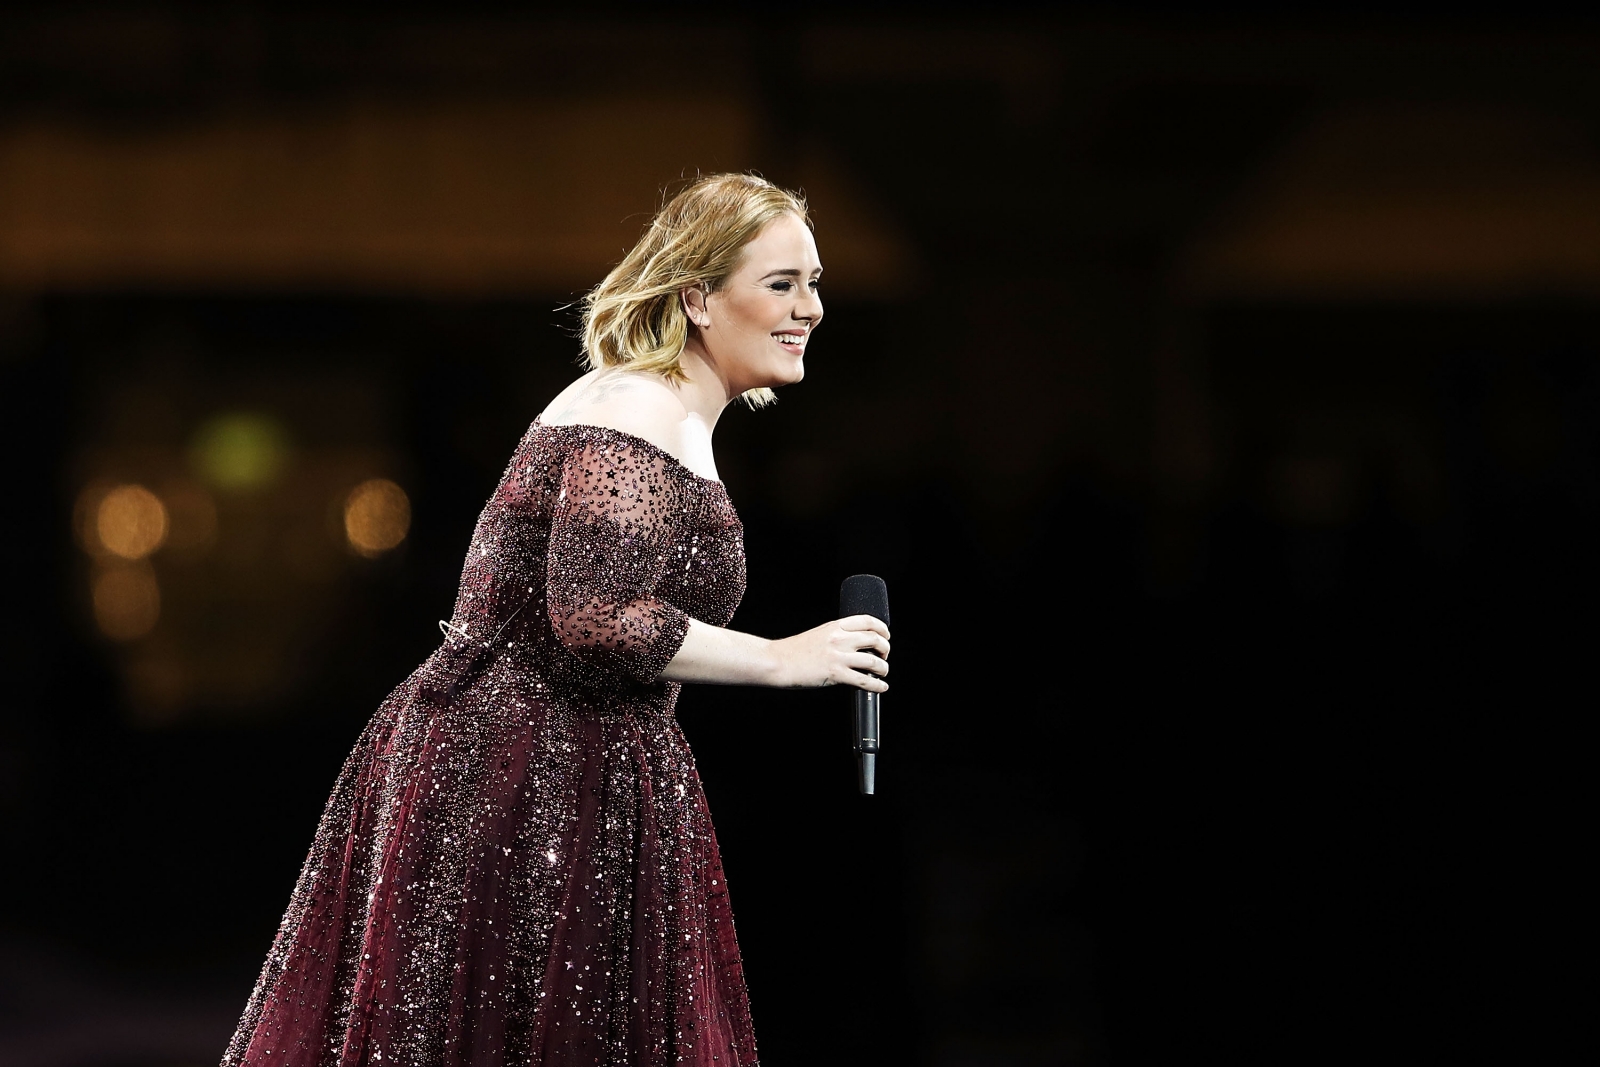 Adele's concert in Adelaide halted by power cut – so singer entertains fans with ...1600 x 1067